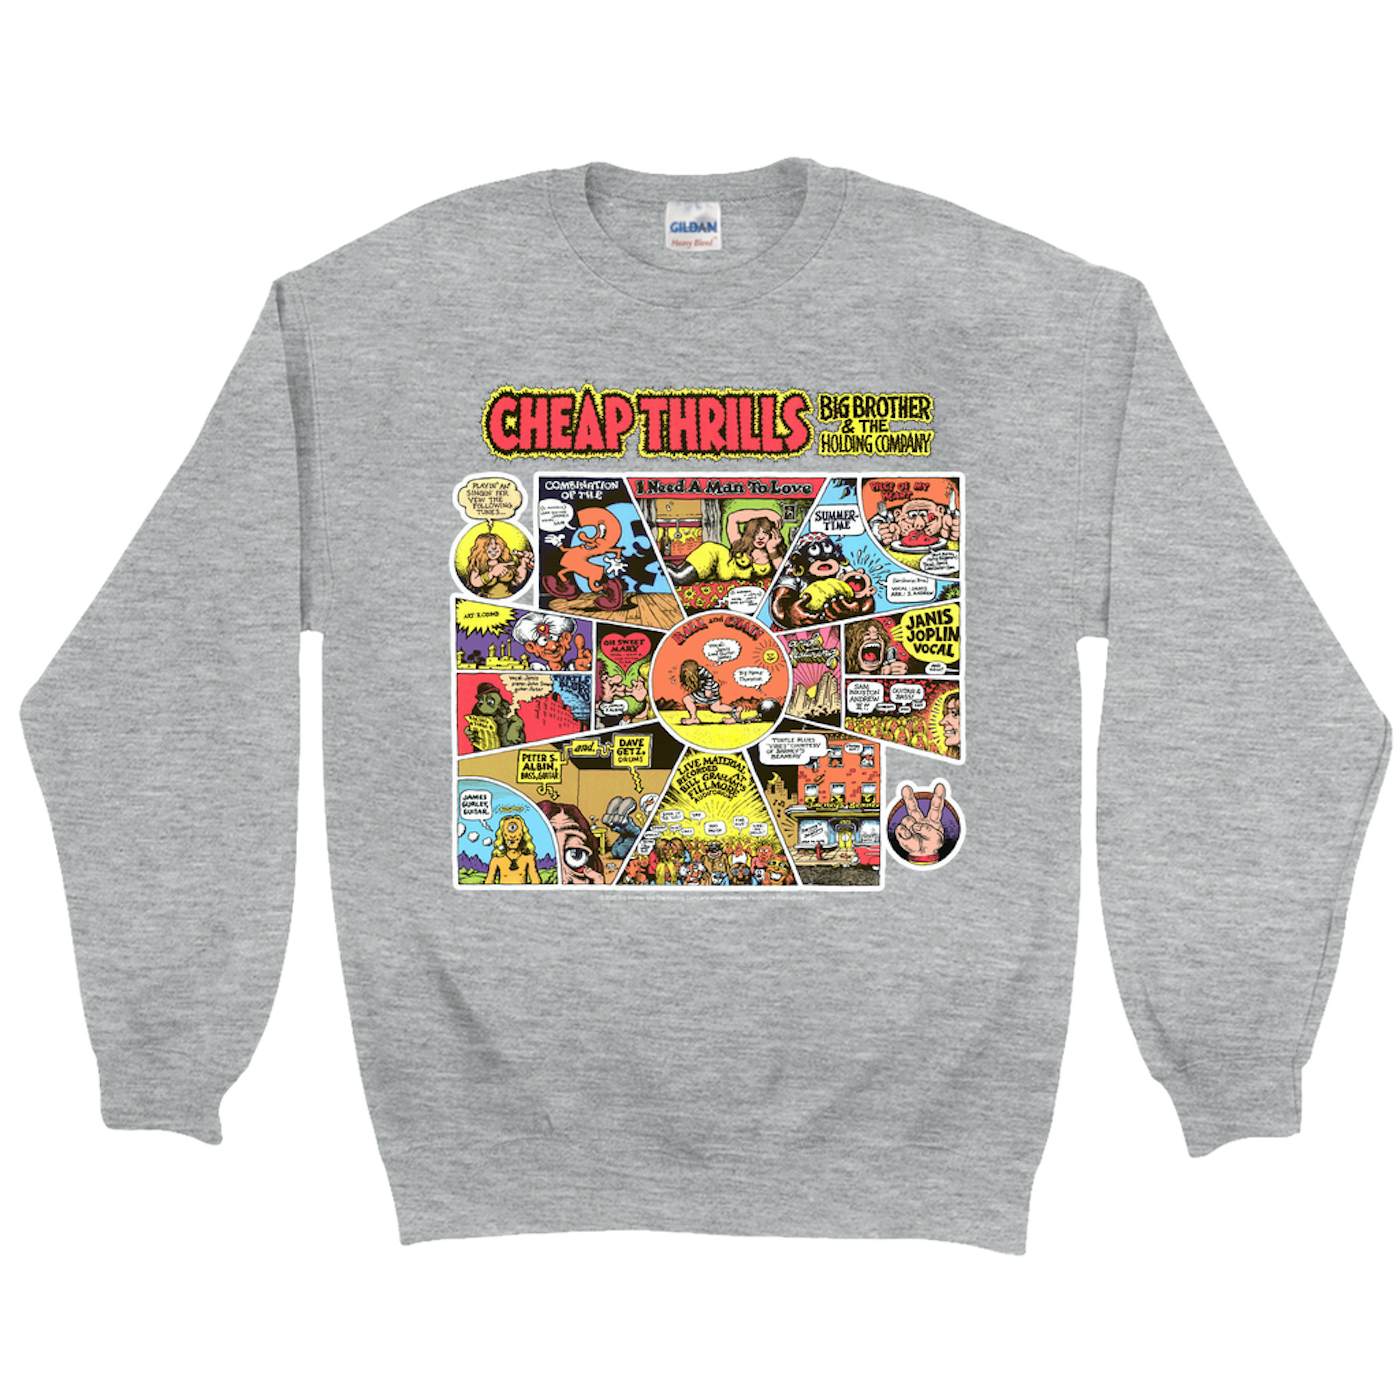 Big Brother & The Holding Company Sweatshirt | Cheap Thrills Album Cover Big Brother and The Holding Company Sweatshirt